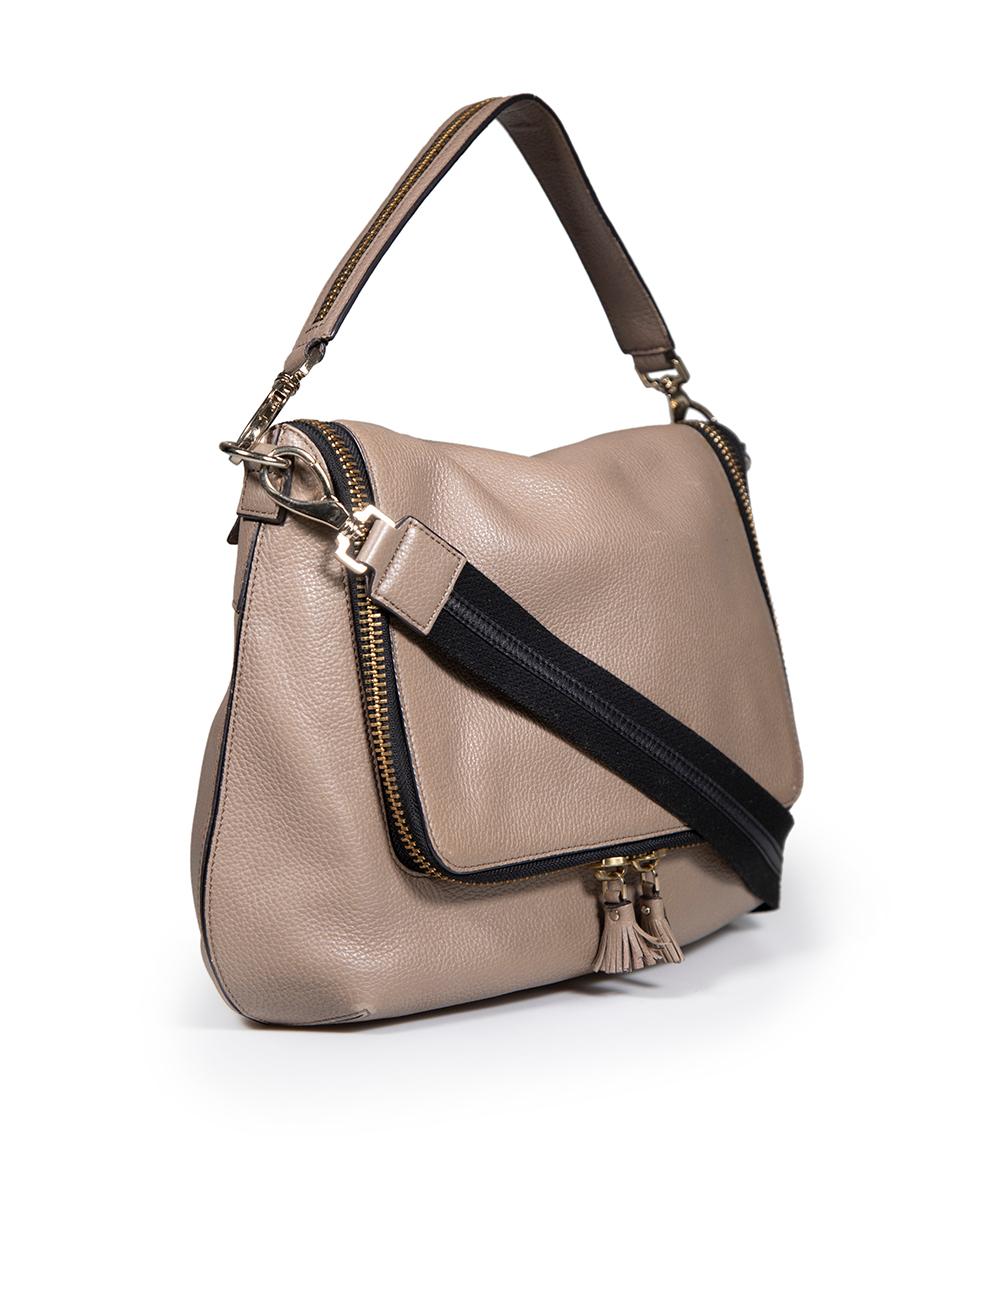 CONDITION is Very good. Minimal wear to bag is evident. Minimal wear to the front and base corners with abrasions and marks to the leather on this used Anya Hindmarch designer resale item.
 
 
 
 Details
 
 
 Model: Maxi zip
 
 Brown
 
 Leather
 
